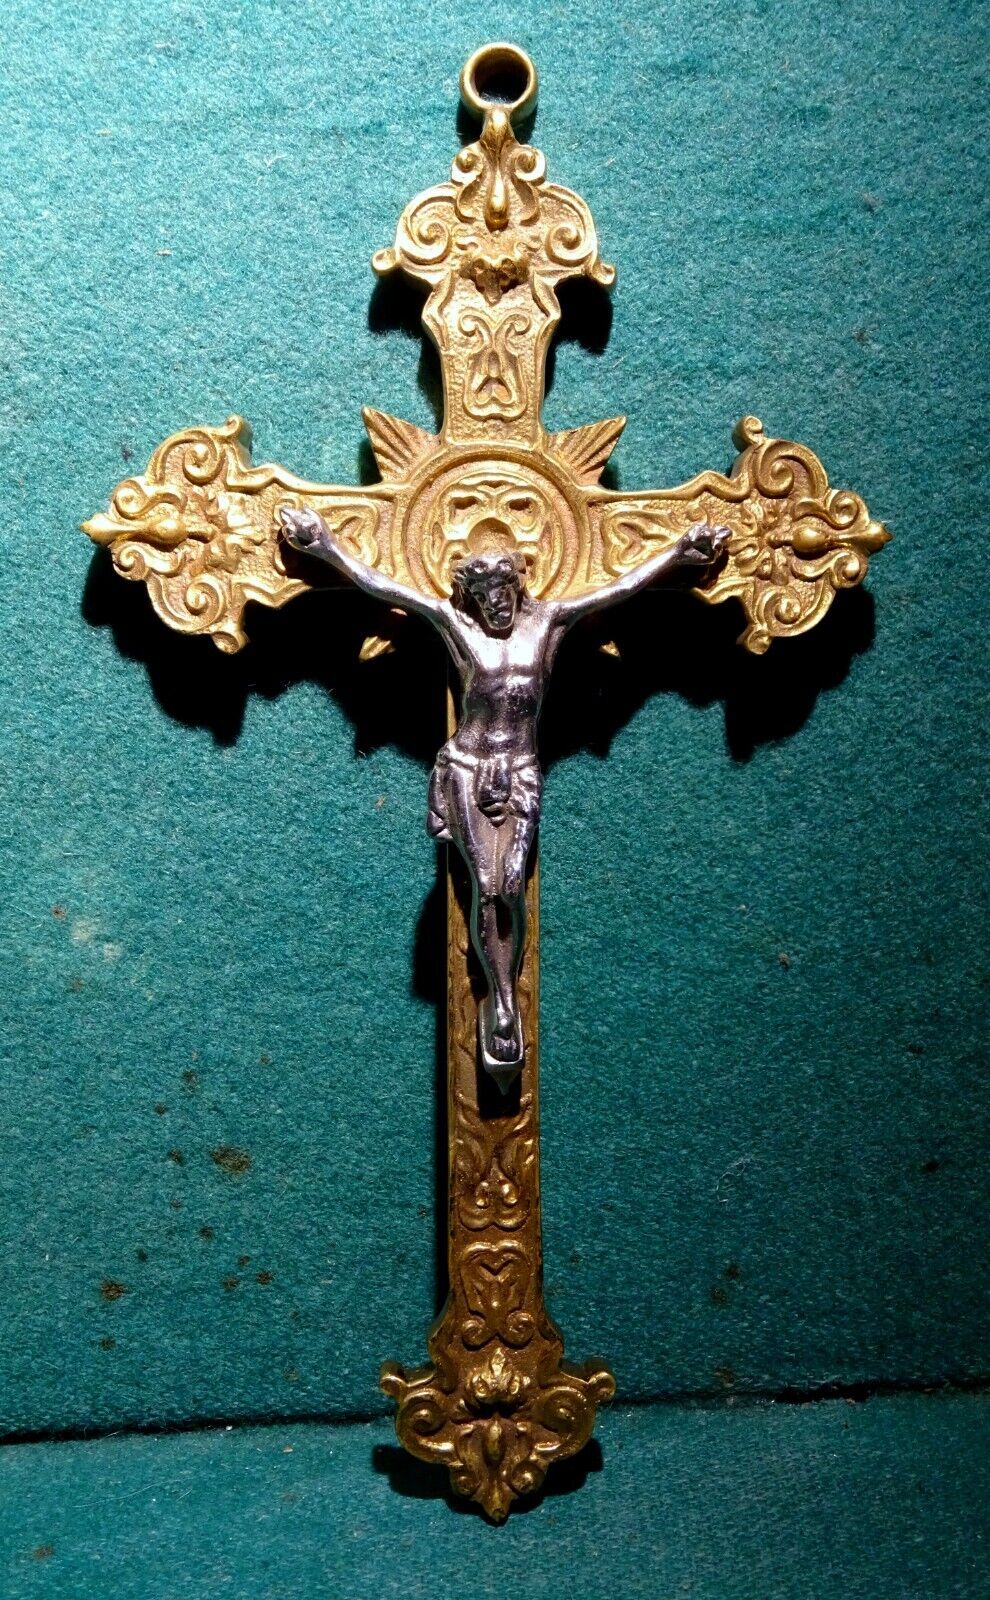 Old VERY DECORATED METAL (BRONZE?) WALL CRUCIFIX CROSS 215mm